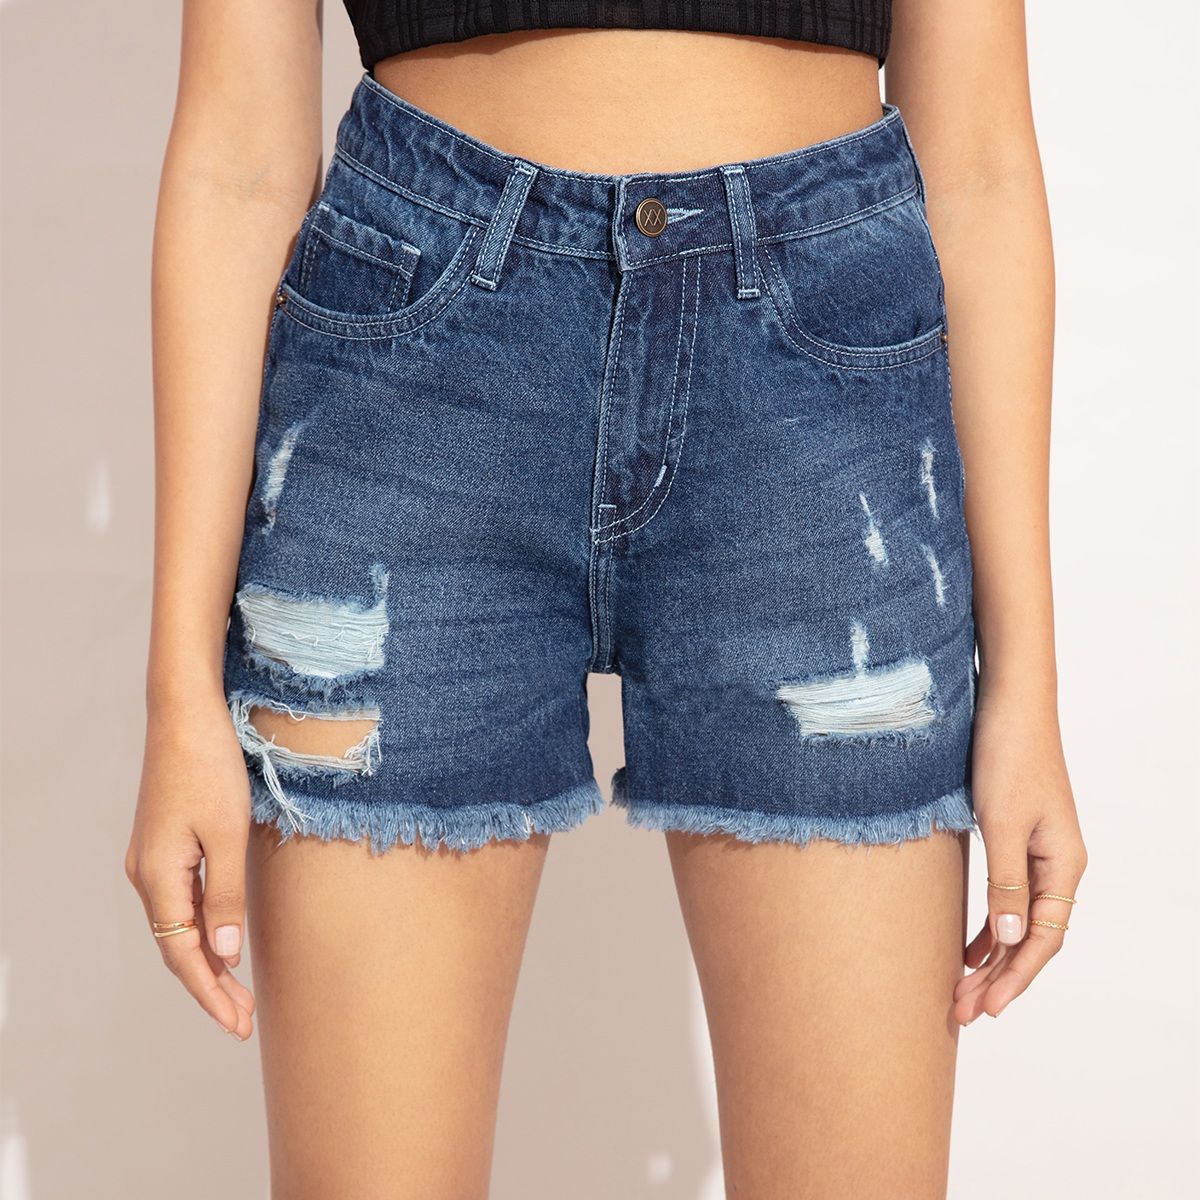 Buy Women Casual Denim Shorts High Waisted Distressed Jean Shorts Ripped  Short Jeans Light Blue Color Waist Size (M_28) at Amazon.in